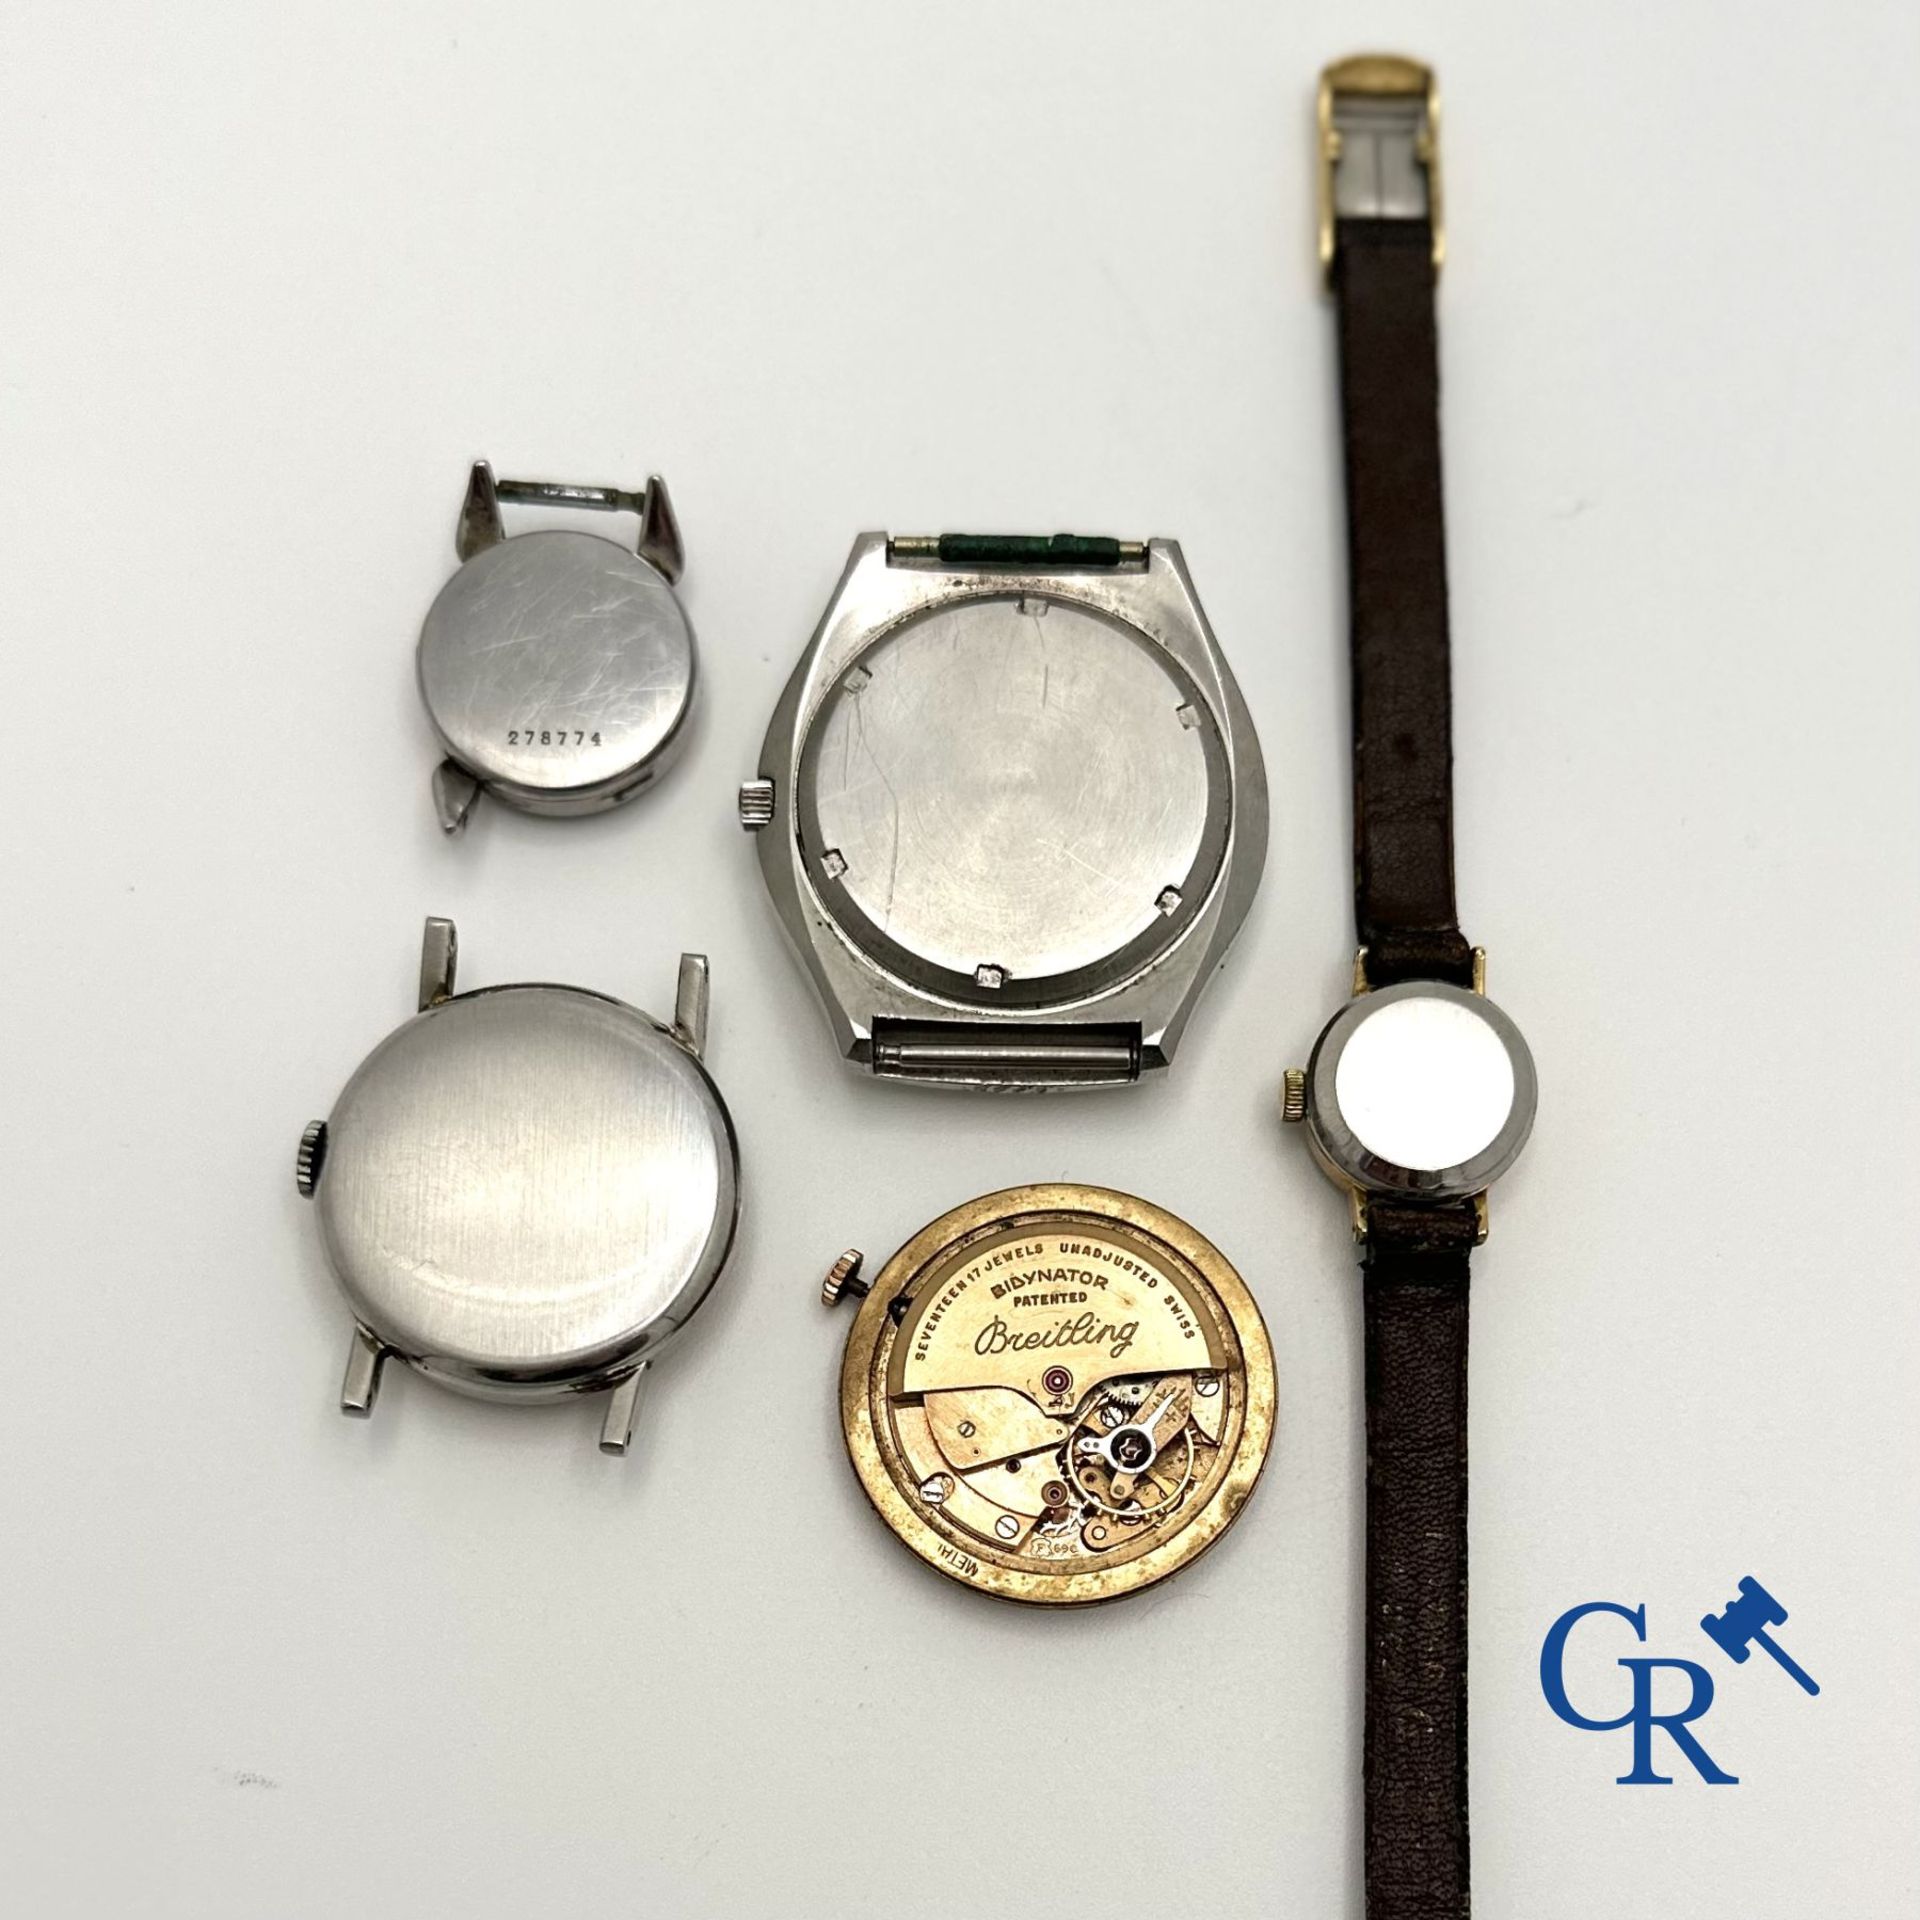 Timepieces: Lot of 3 Omega timepieces, a women's Rolex timepiece and a Breitling movement. - Image 3 of 4